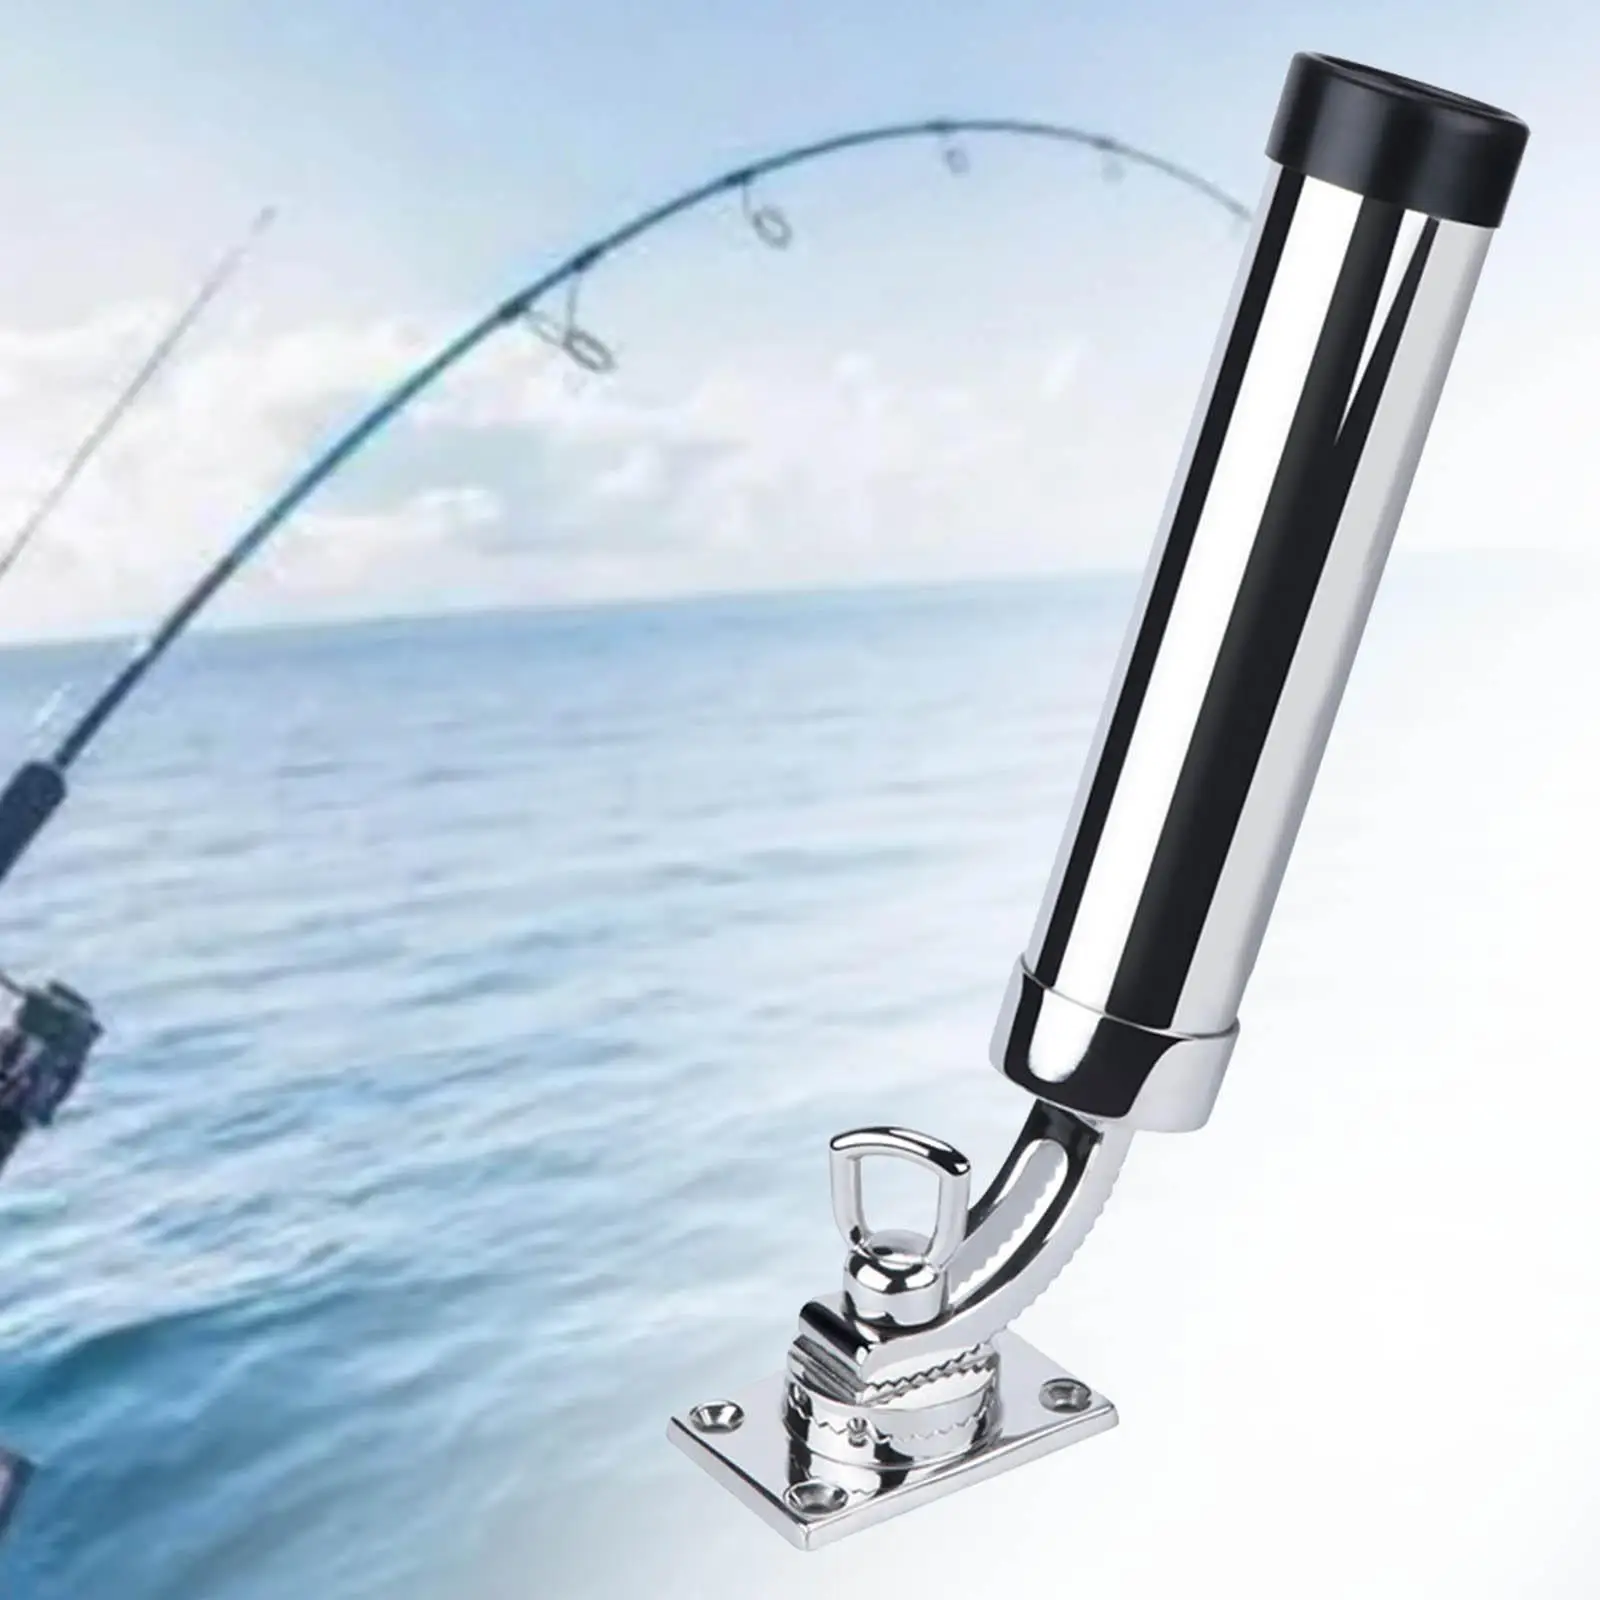 Stainless Steel Fishing Rod Holder Professional Fishing Pole Rack Boat Durable Rail Mounted Easy Installation Rail Mounted Clamp